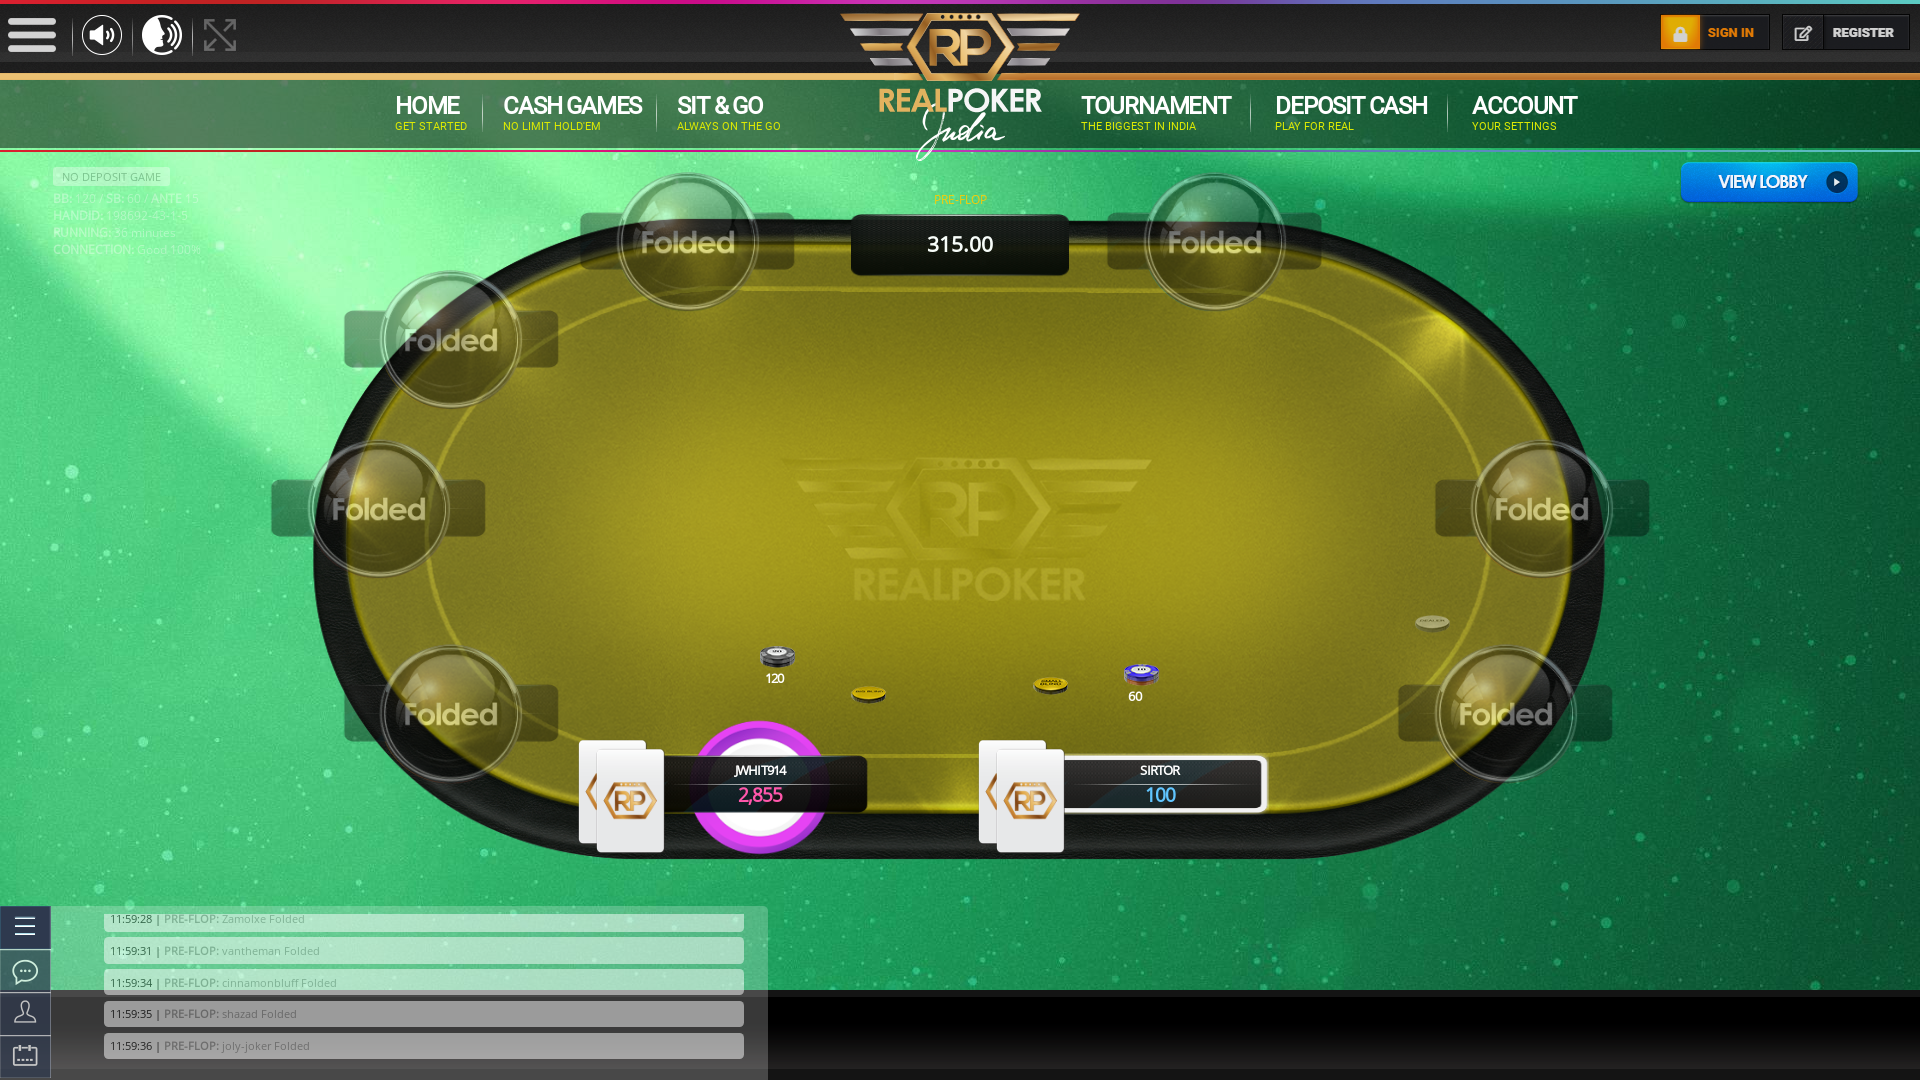 Real poker 10 player table in the 36th minute